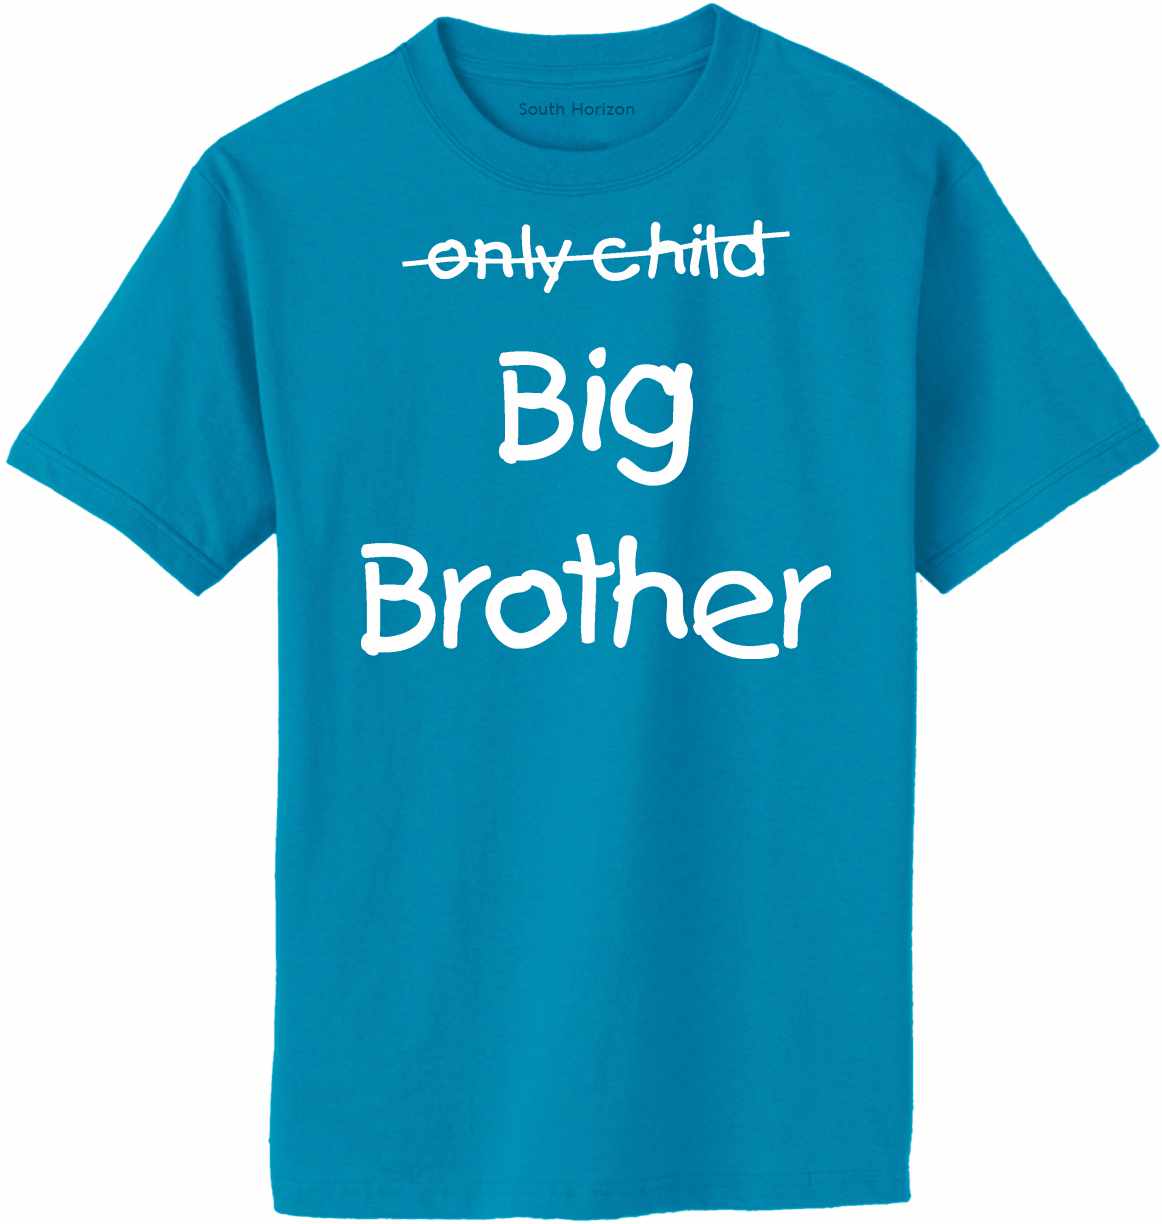 Only Child BIG BROTHER on Adult T-Shirt (#965-1)